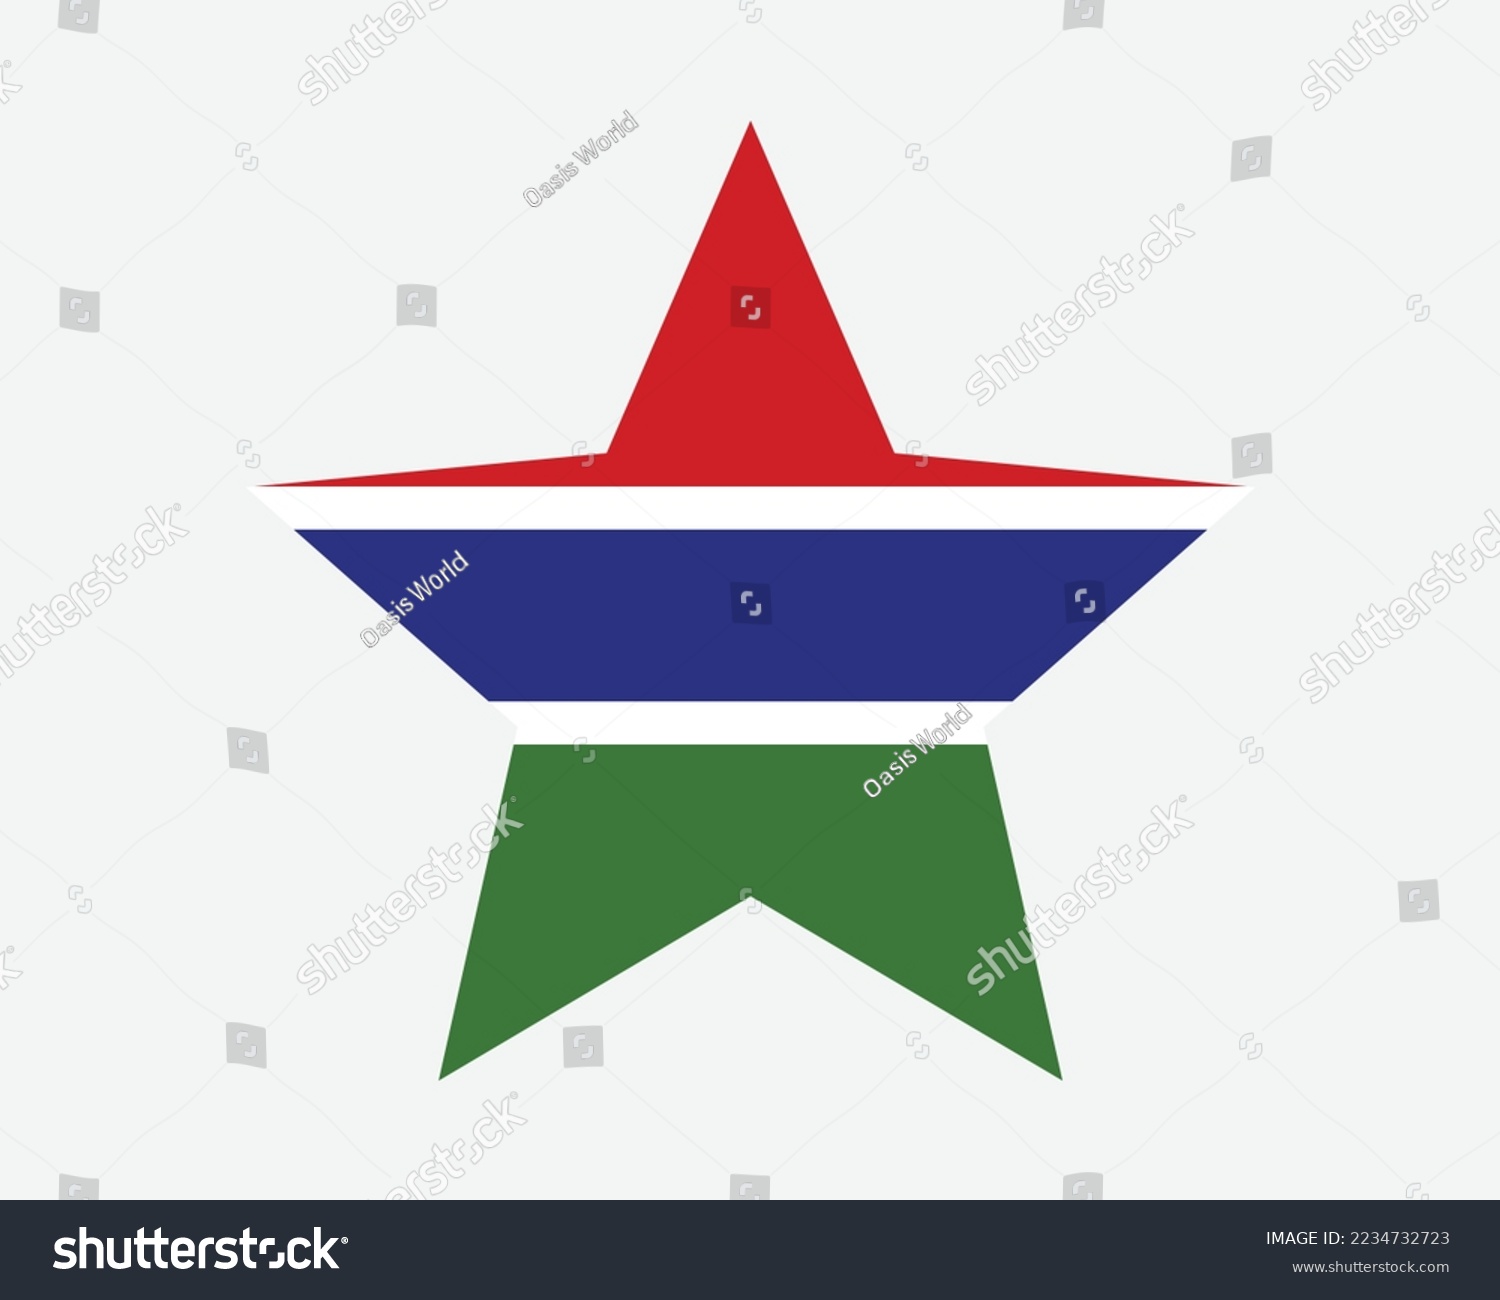 SVG of The Gambia Star Flag. Gambian Star Shape Flag. Country National Banner Icon Symbol Vector Flat Artwork Graphic Illustration svg